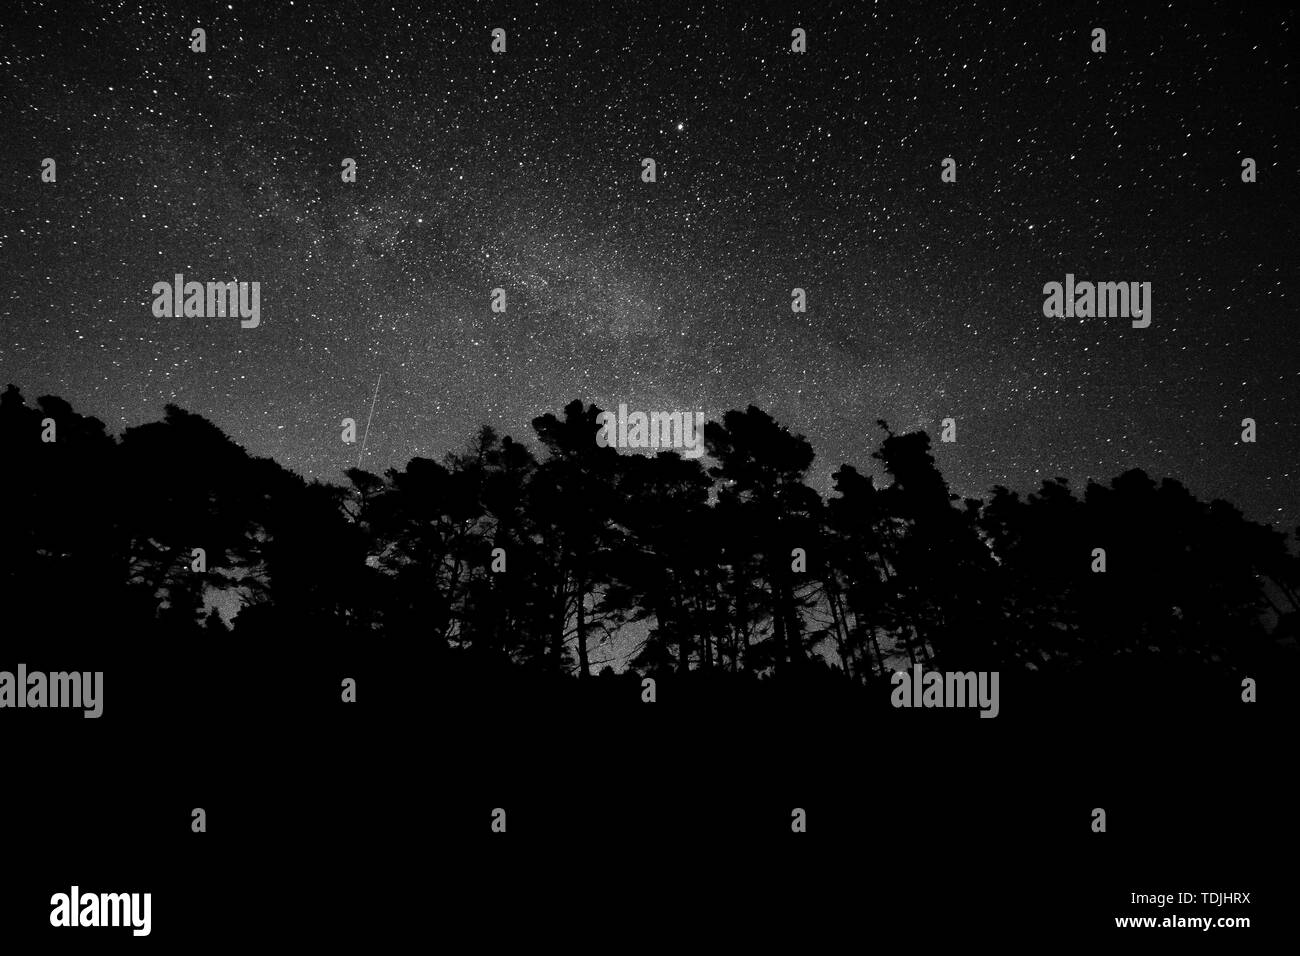 Starry night with tall trees Stock Photo